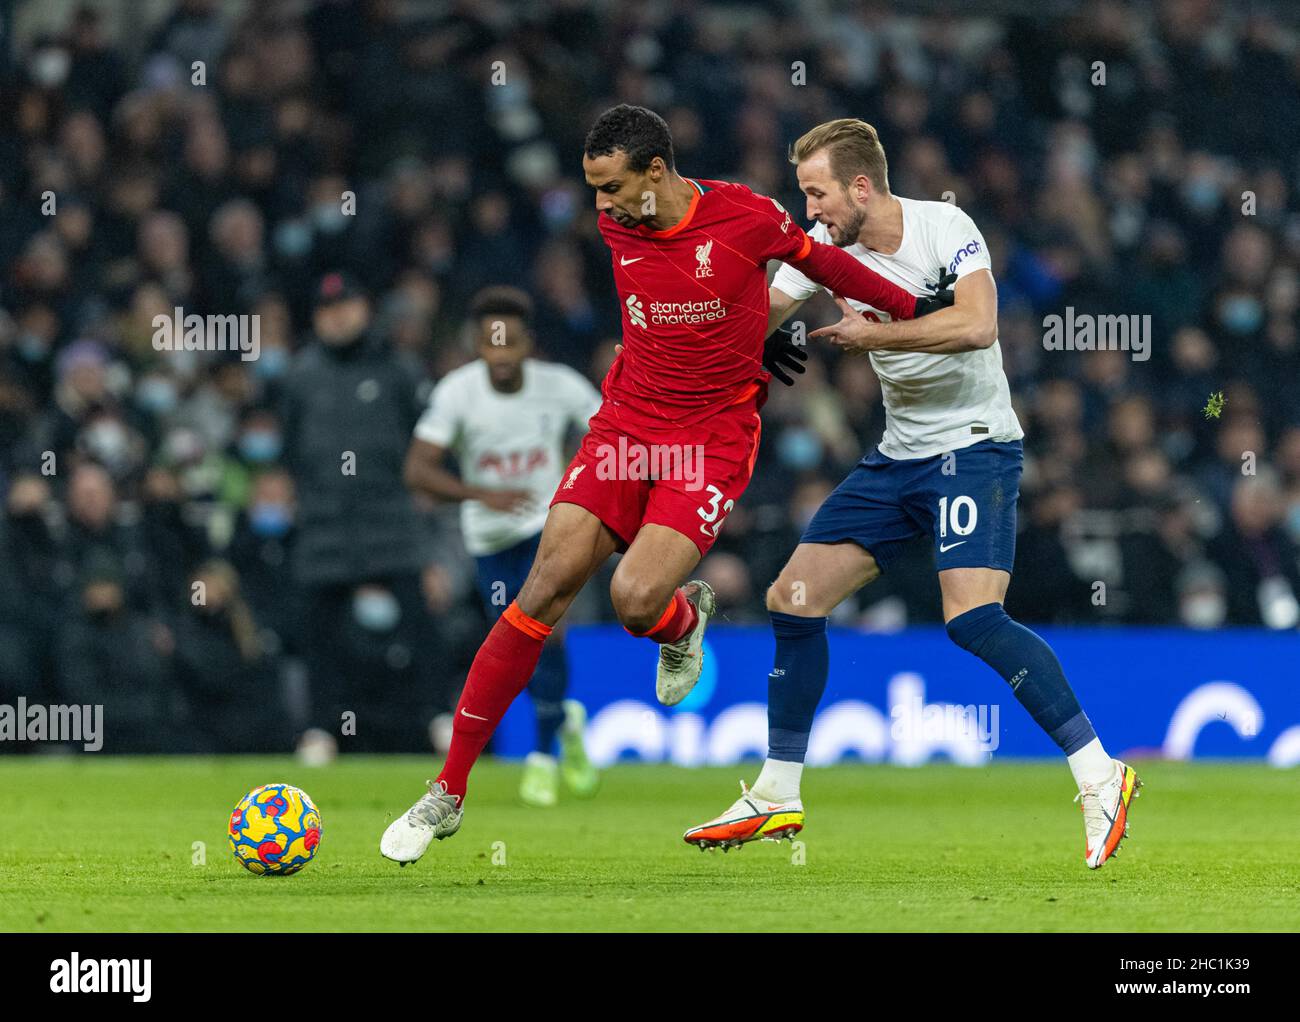 (211220) -- LONDON, Dec. 20, 2021 (Xinhua) -- Liverpool's Joel Matip (L) is challenged by Tottenham Hotspur's Harry Kane during the English Premier League match between Tottenham Hotspur and Liverpool in London, Britain, on Dec. 19, 2021. (Xinhua)FOR EDITORIAL USE ONLY. NOT FOR SALE FOR MARKETING OR ADVERTISING CAMPAIGNS. NO USE WITH UNAUTHORIZED AUDIO, VIDEO, DATA, FIXTURE LISTS, CLUB/LEAGUE LOGOS OR 'LIVE' SERVICES. ONLINE IN-MATCH USE LIMITED TO 45 IMAGES, NO VIDEO EMULATION. NO USE IN BETTING, GAMES OR SINGLE CLUB/LEAGUE/PLAYER PUBLICATIONS. Stock Photo